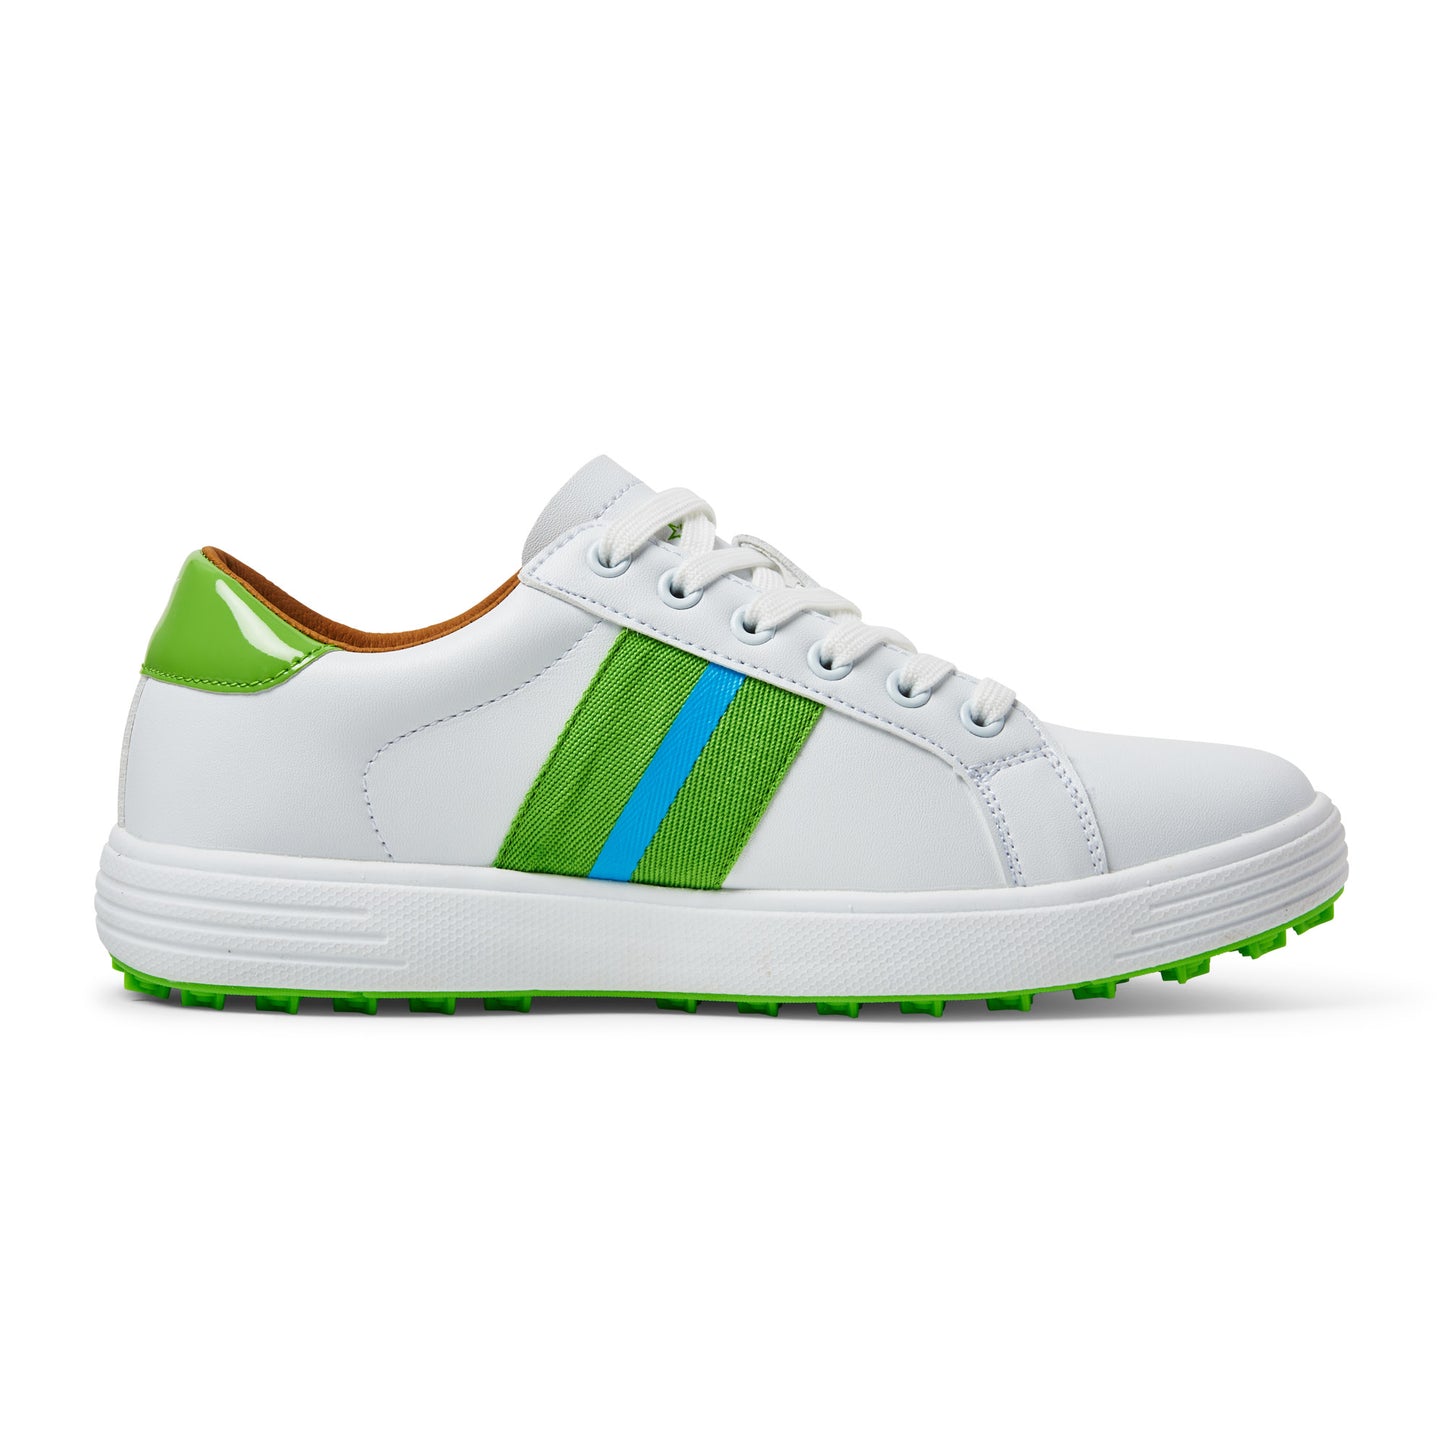 Swing Out Sister Women's Sole Sister Golf Shoes in Emerald and Dazzling Blue